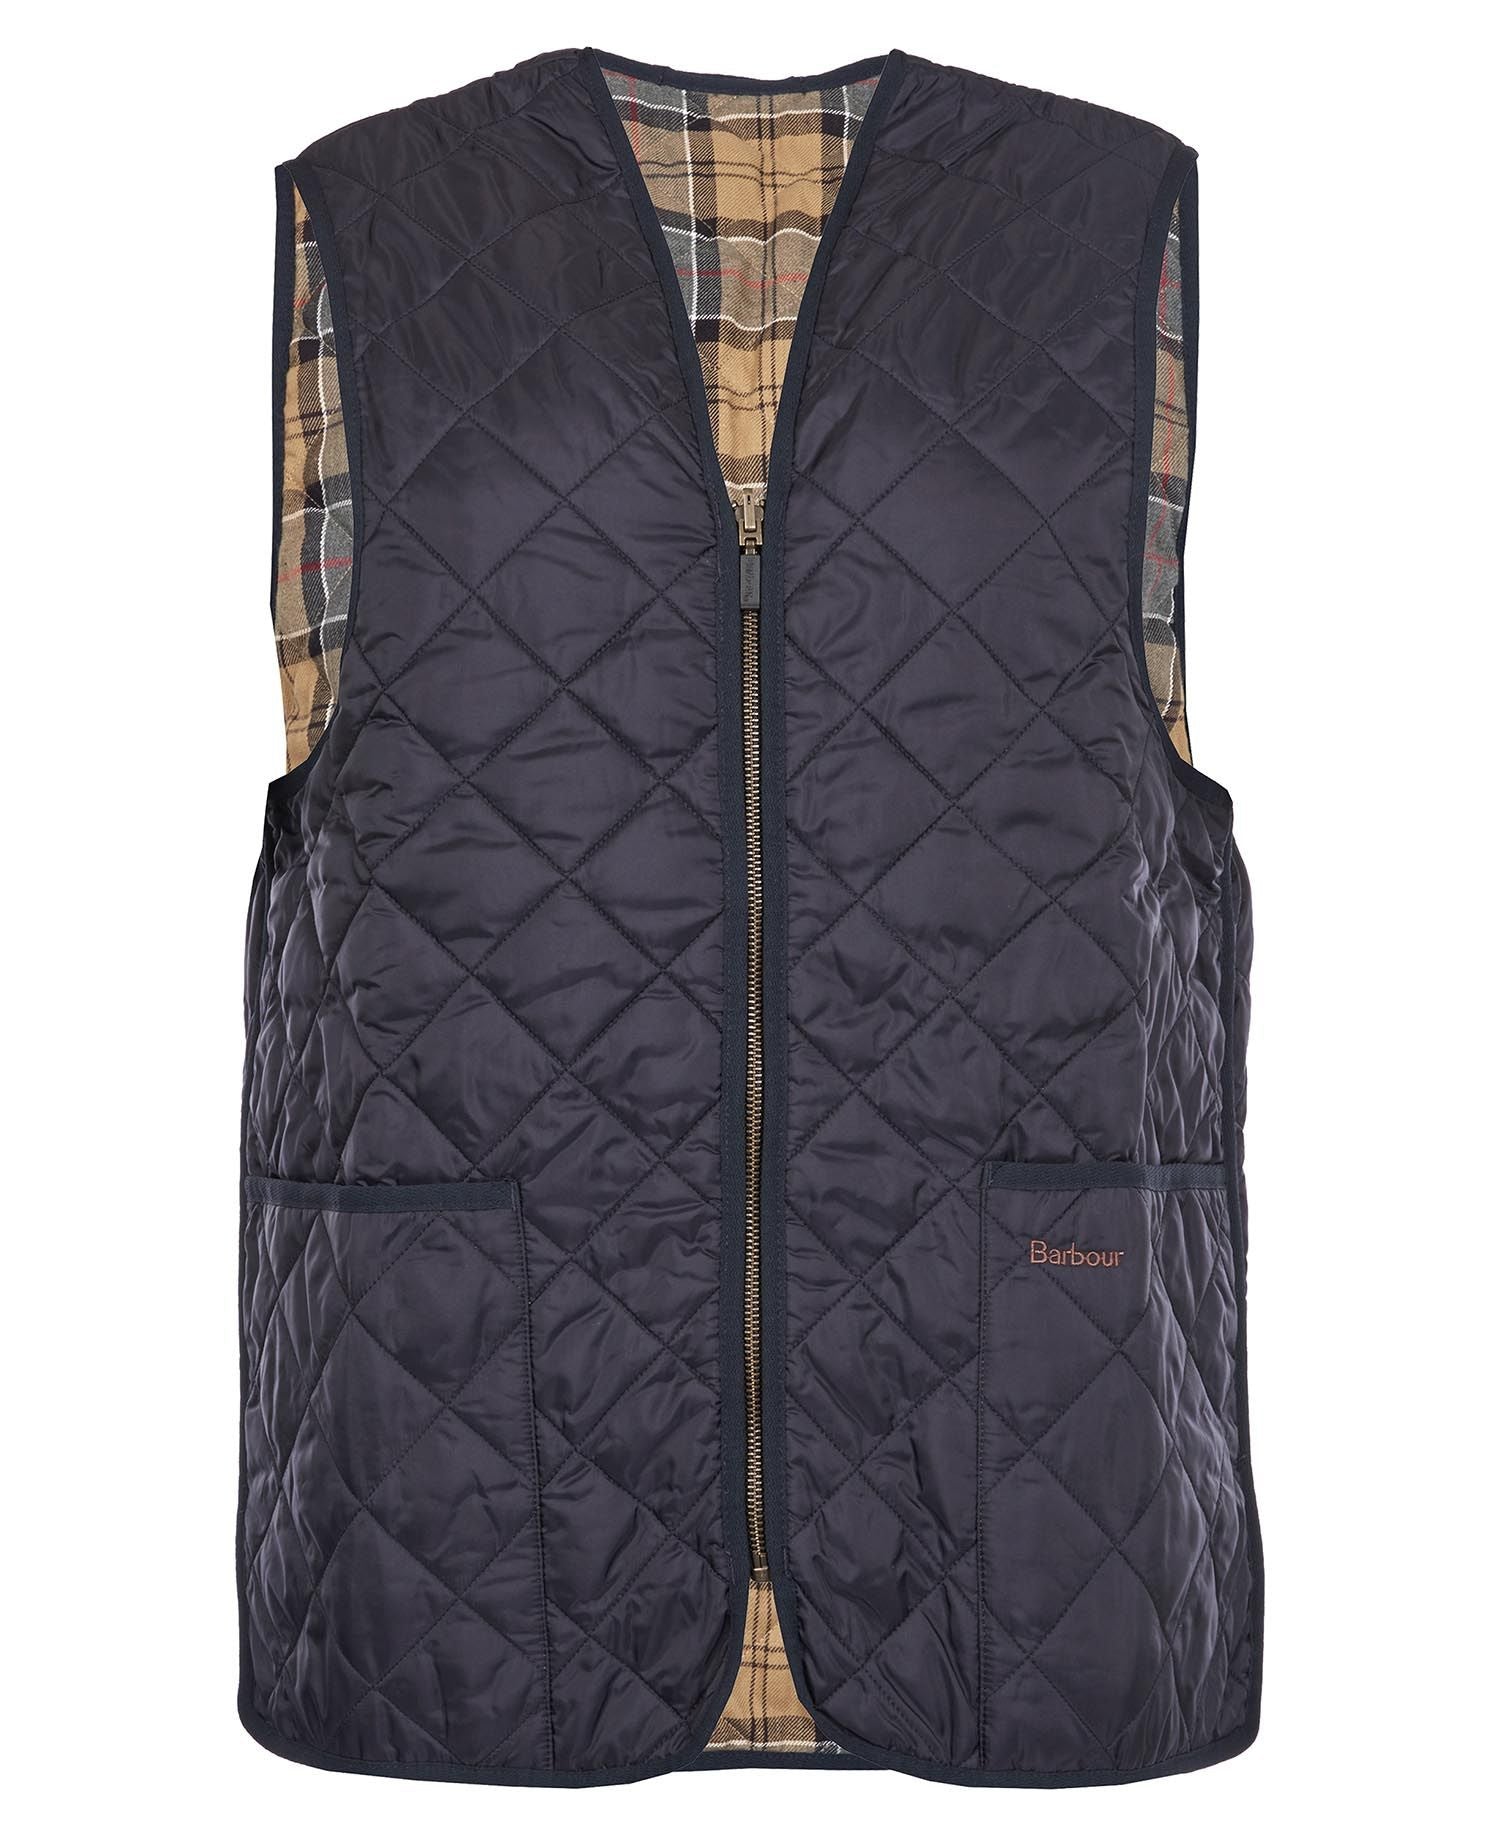 Gilet Barbour Quilted MLI0001